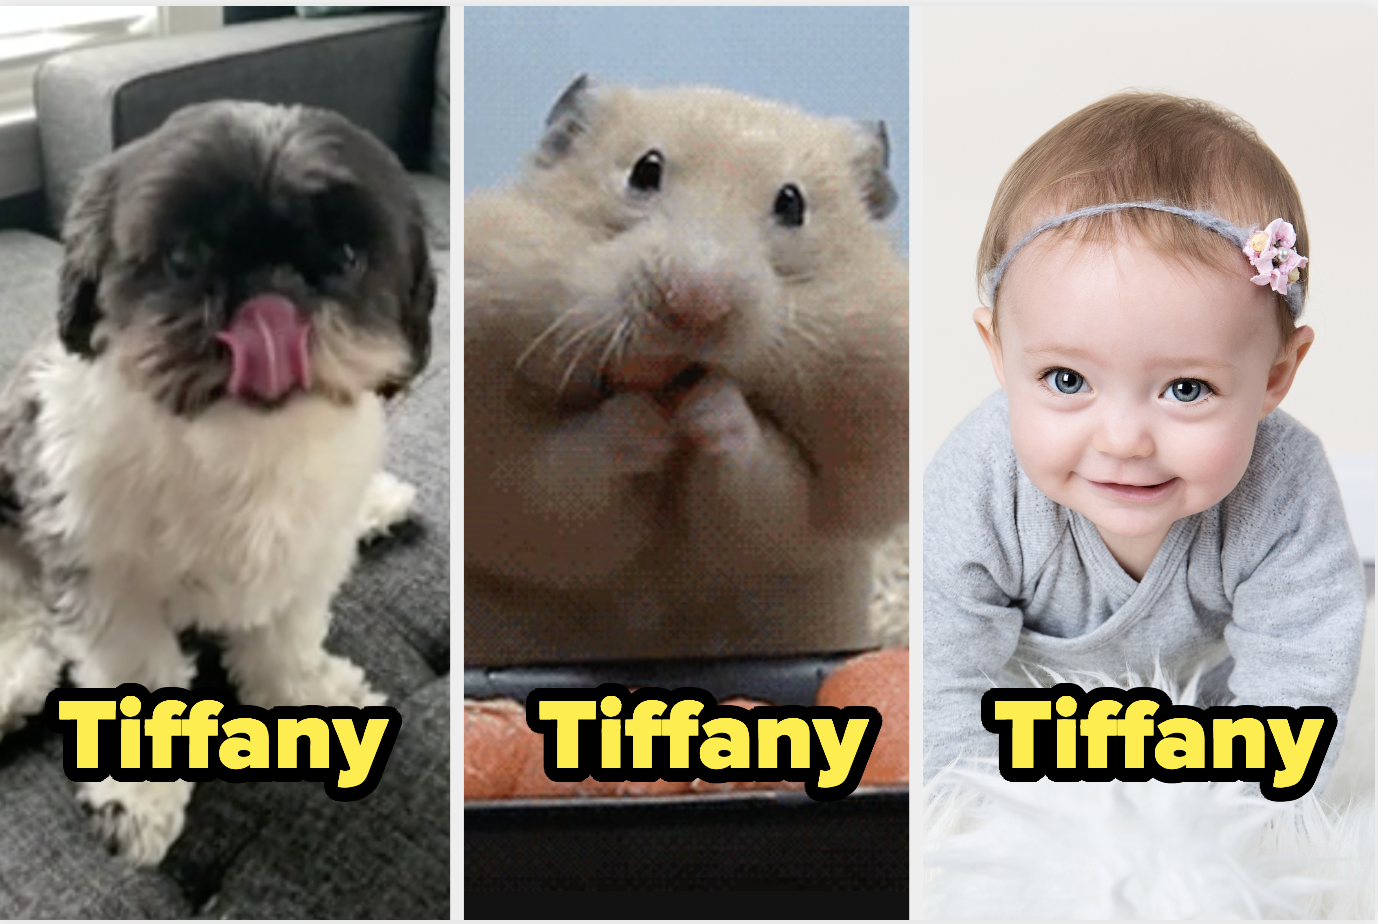 A dog, hamster, and baby all named tiffany